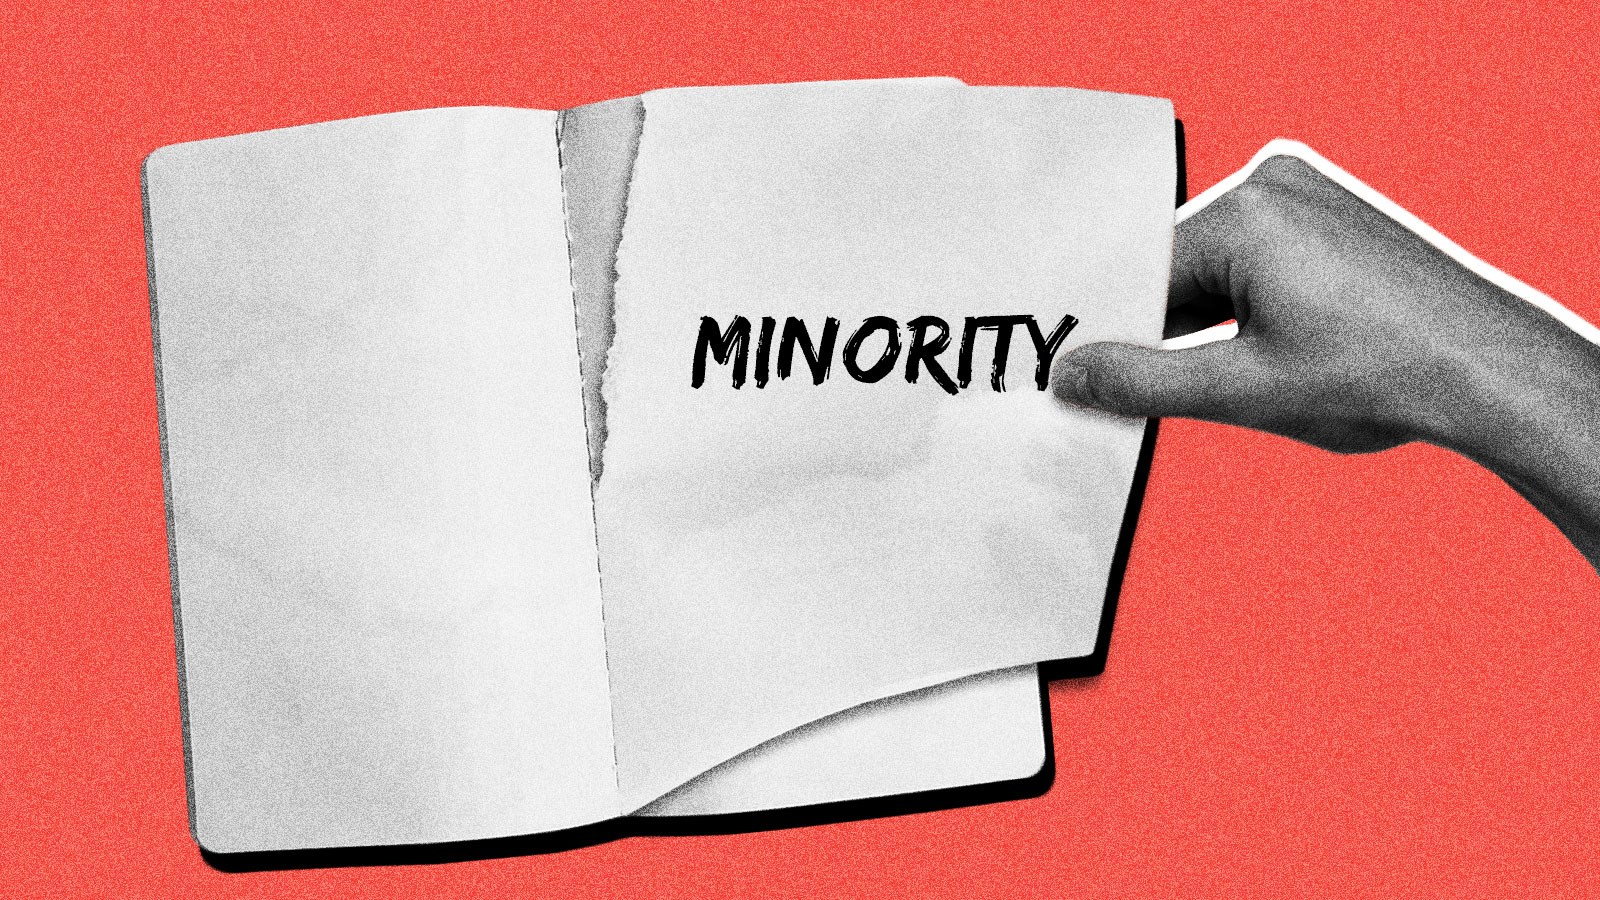 ripping 'minority' out of the dictionary